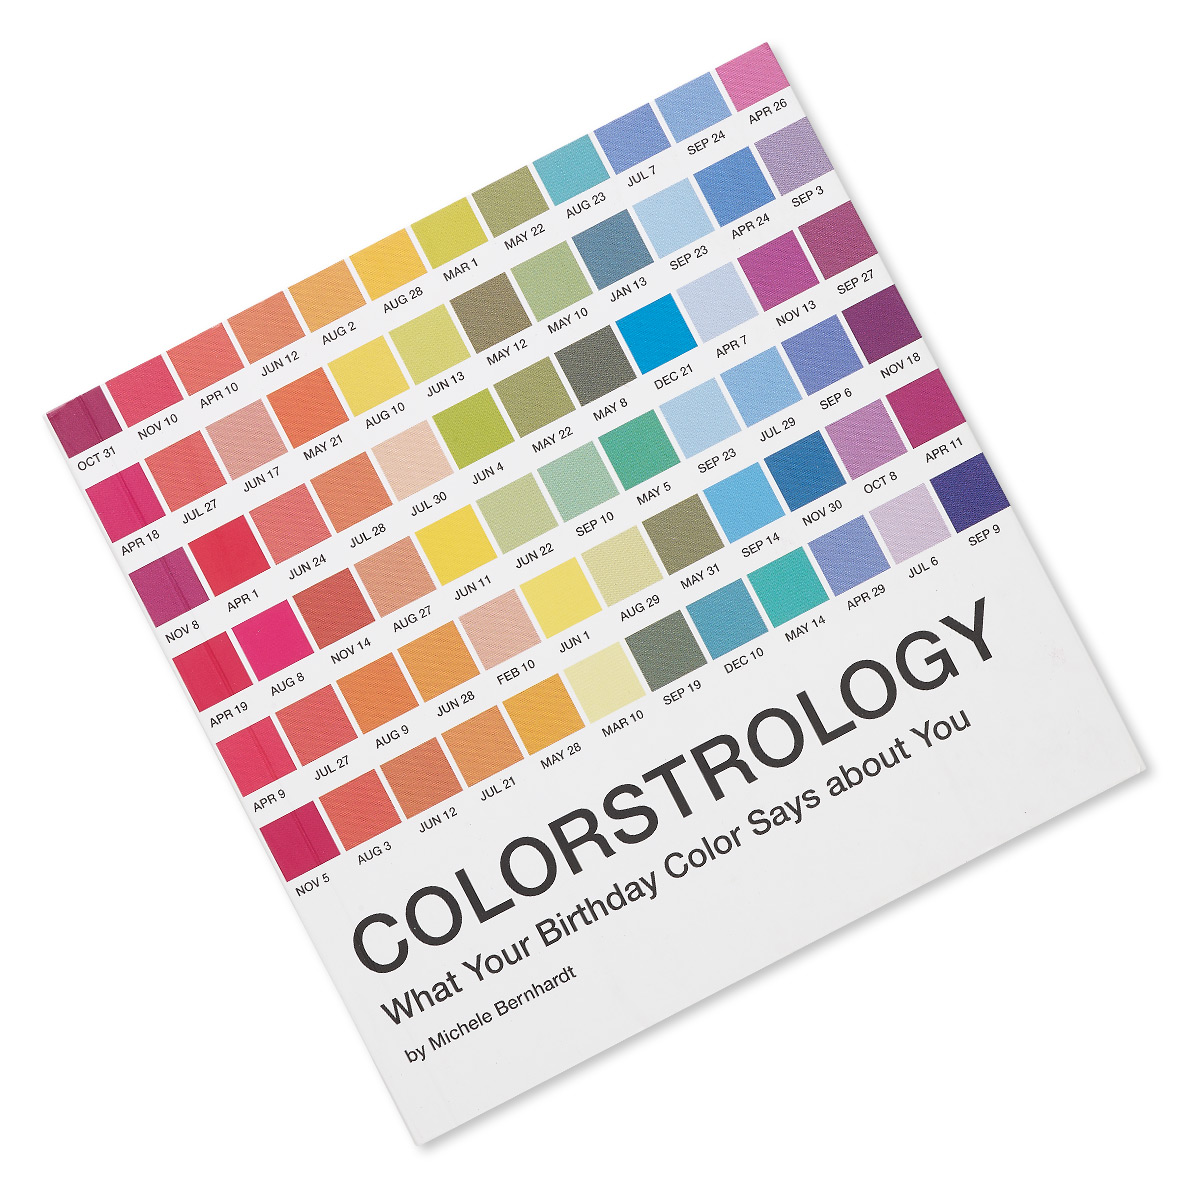 colorstrology oct 9 compatible birthdays